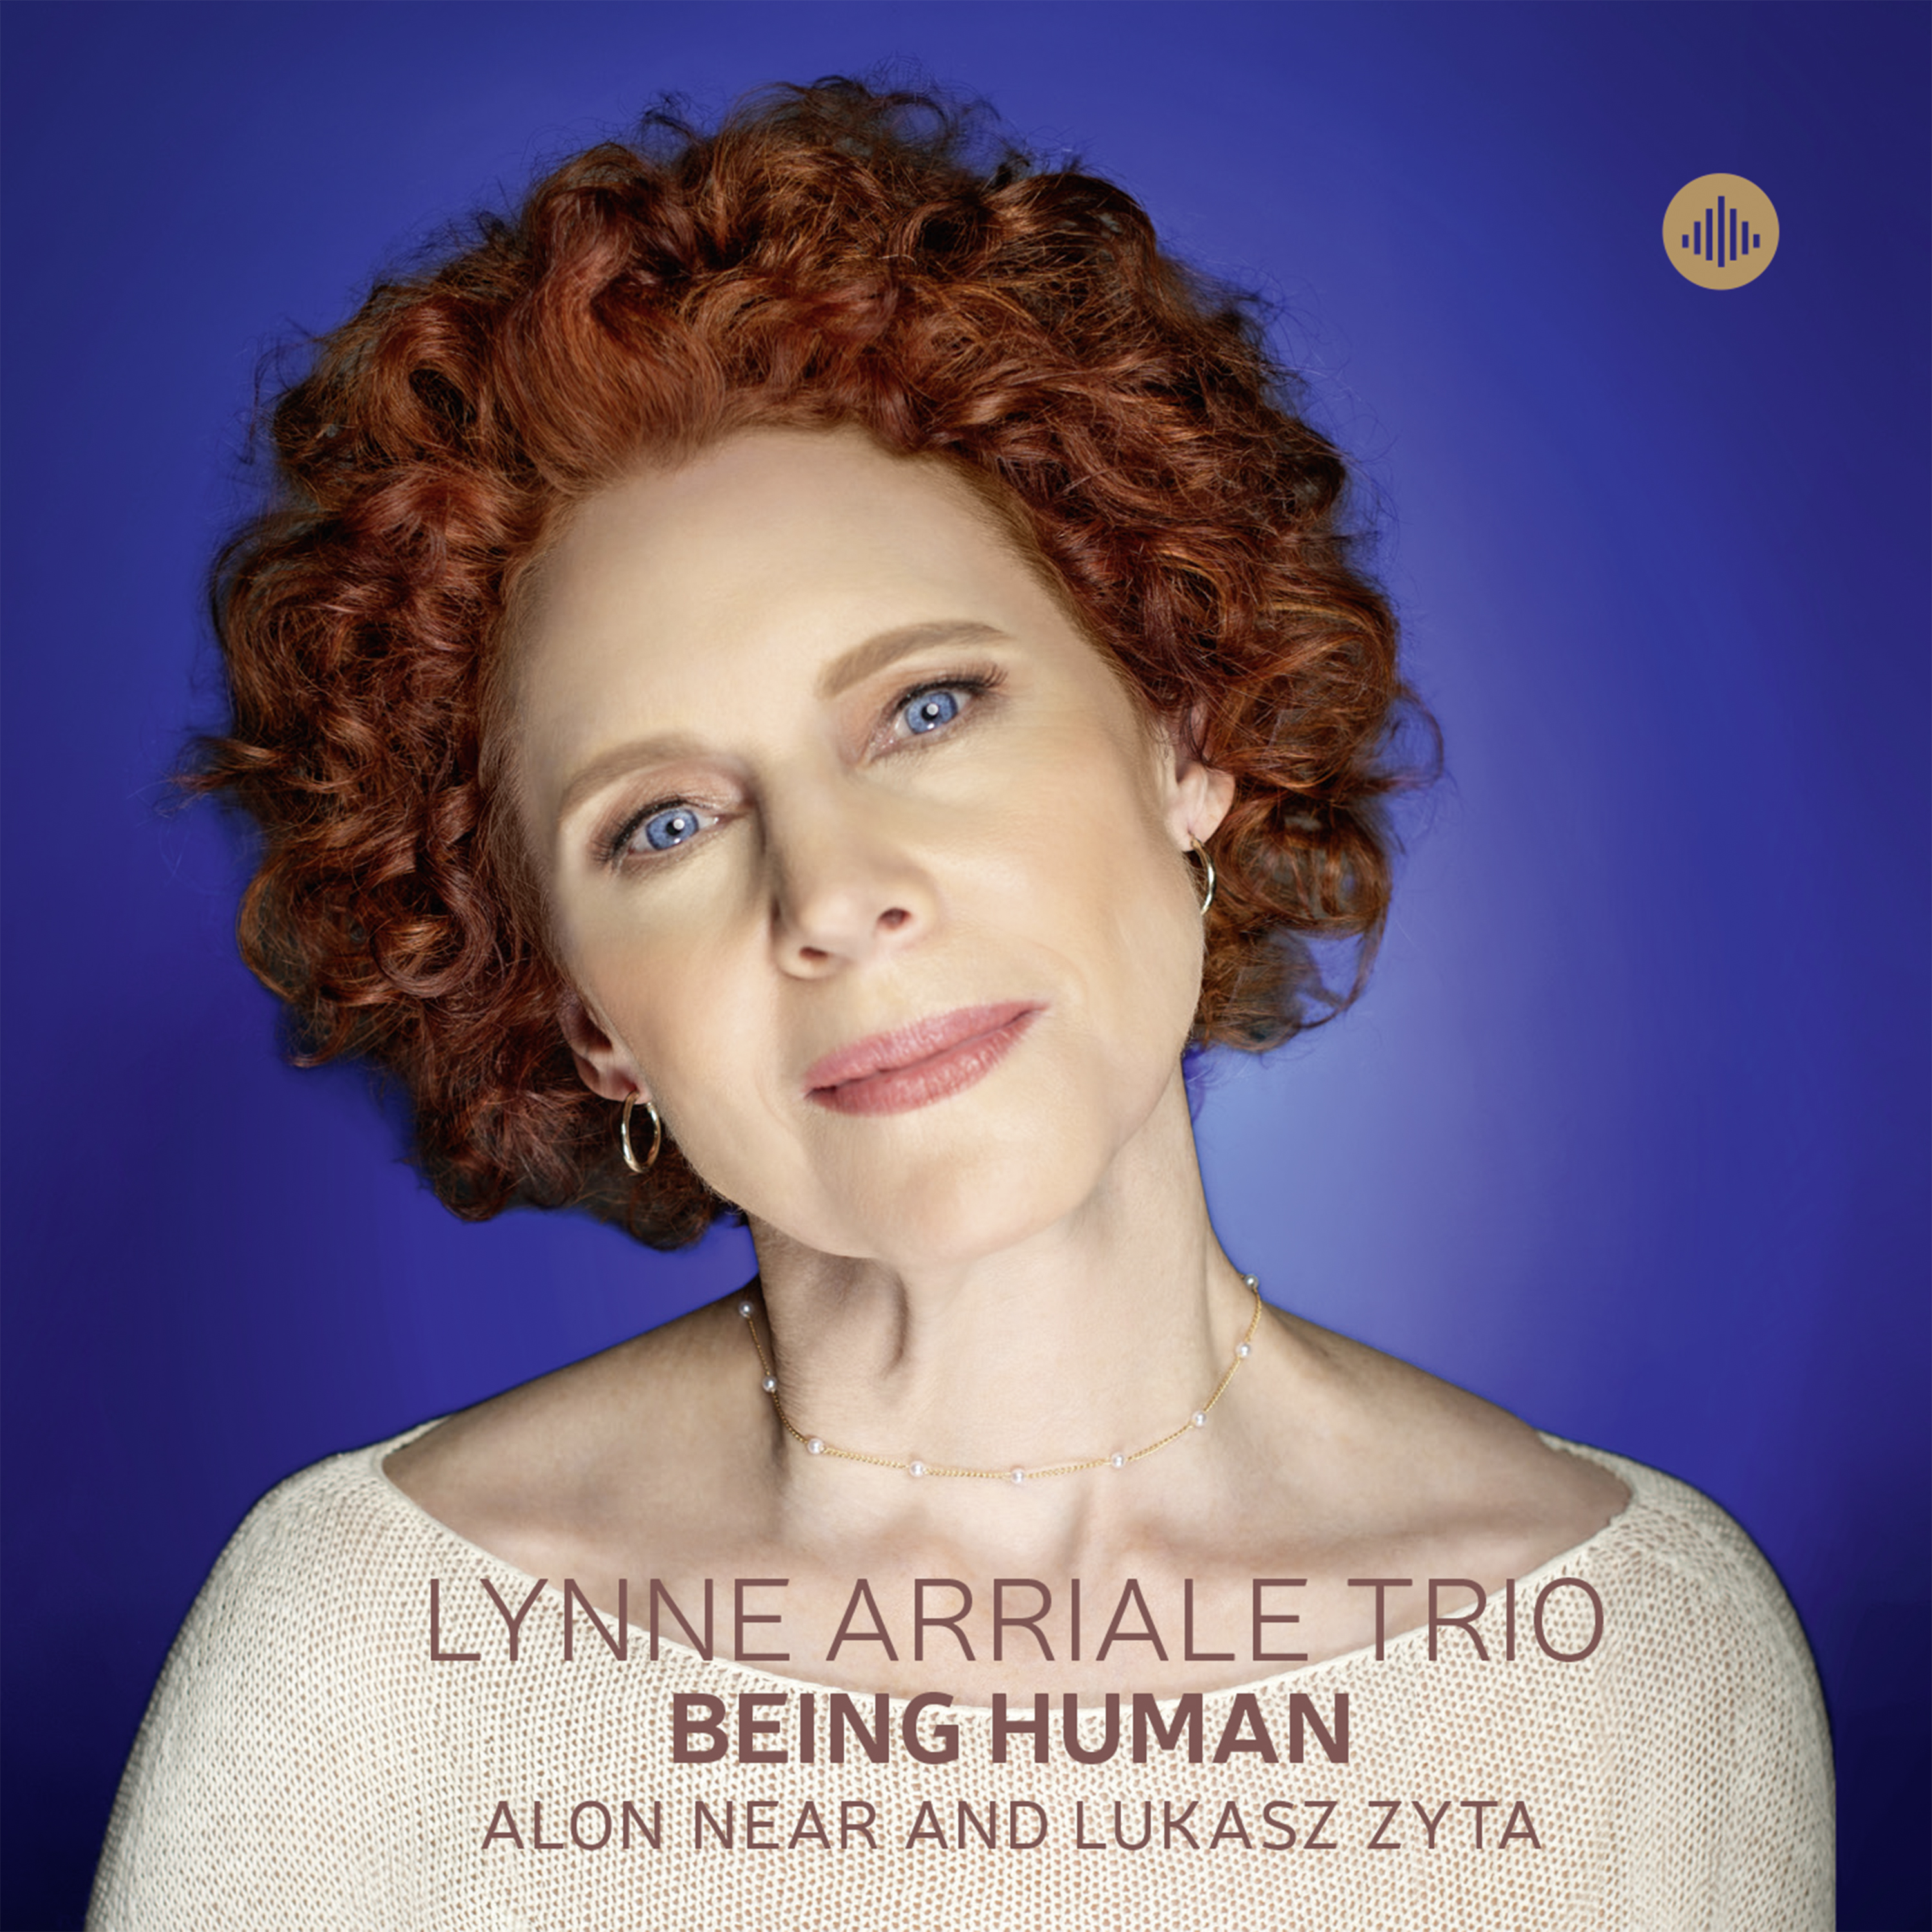 LYNNE ARRIALE - Being Human cover 